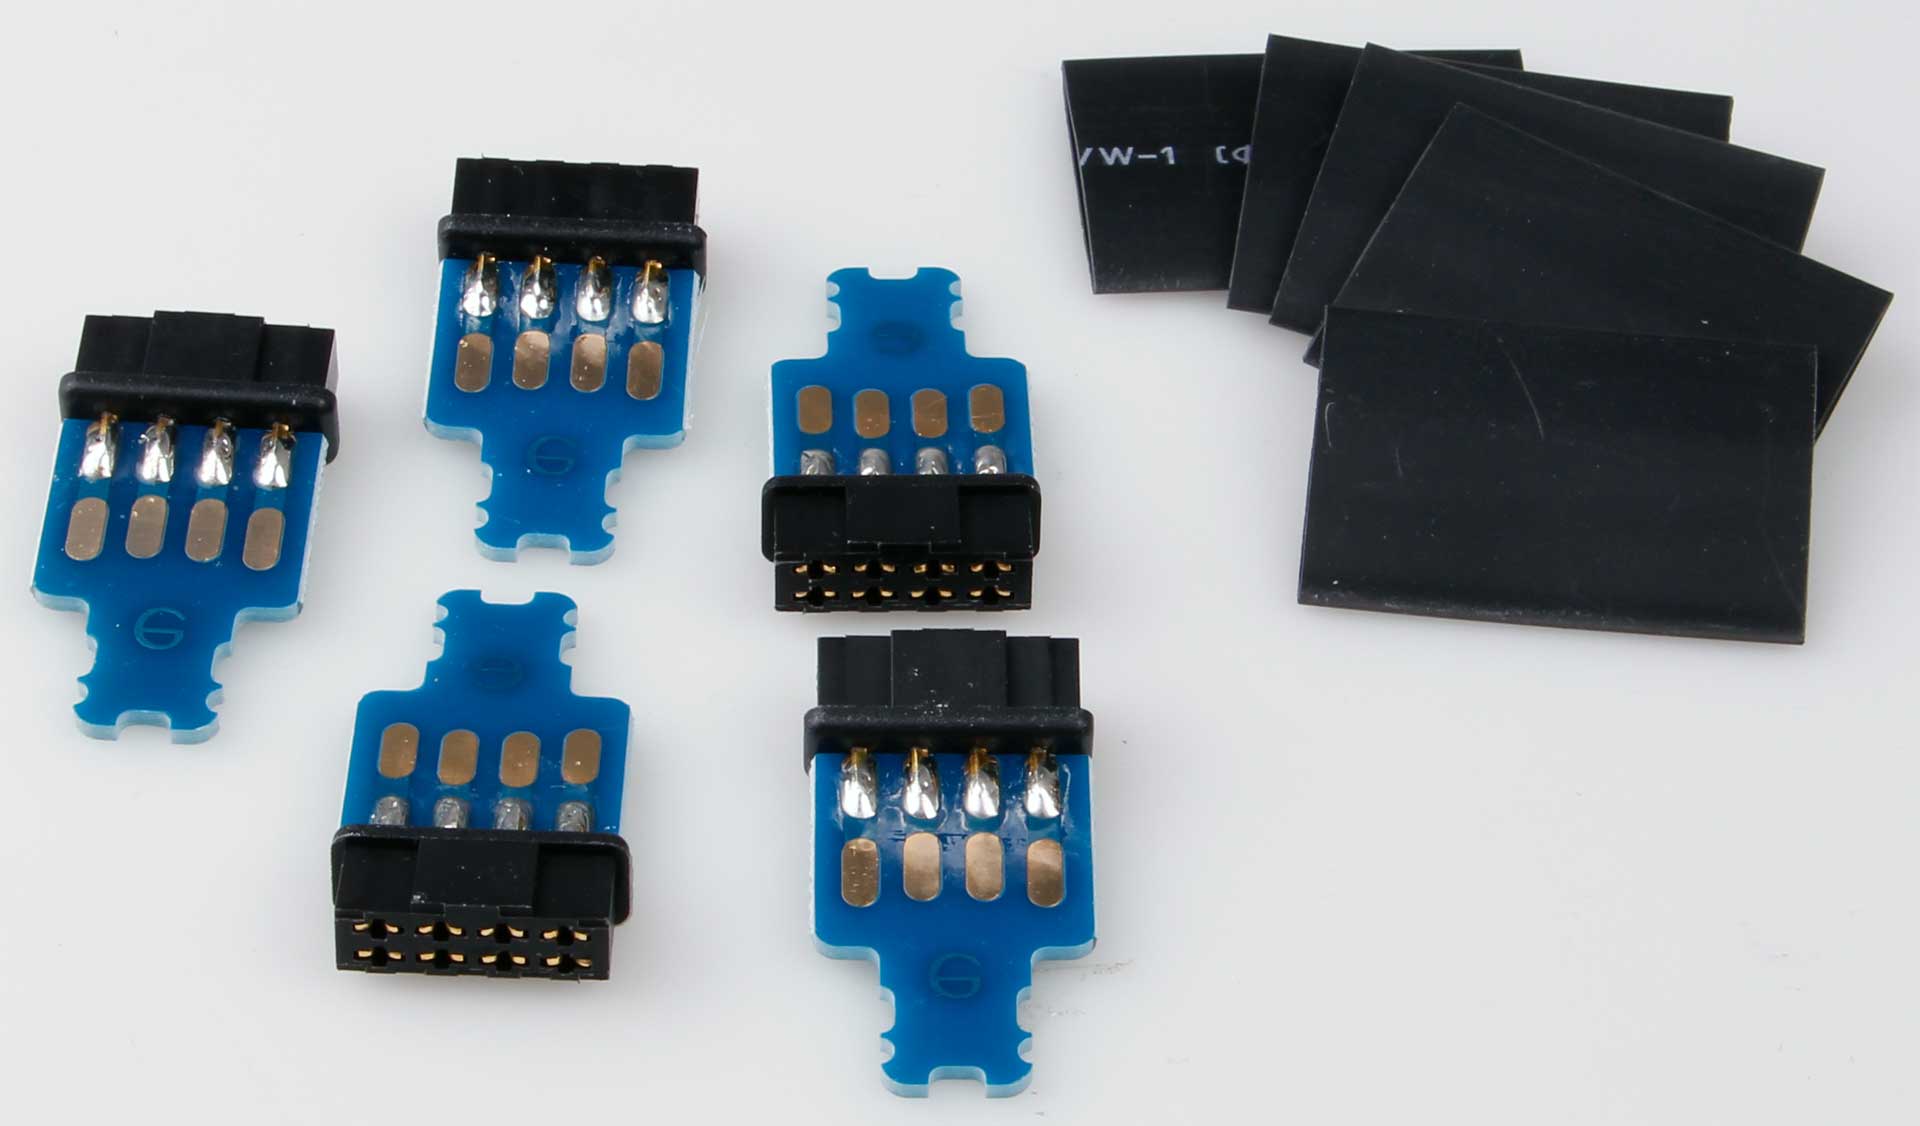 Robbe Modellsport solder board 8-pin MPX "Hochstrom" connector system with female (contact = female) 5 pcs